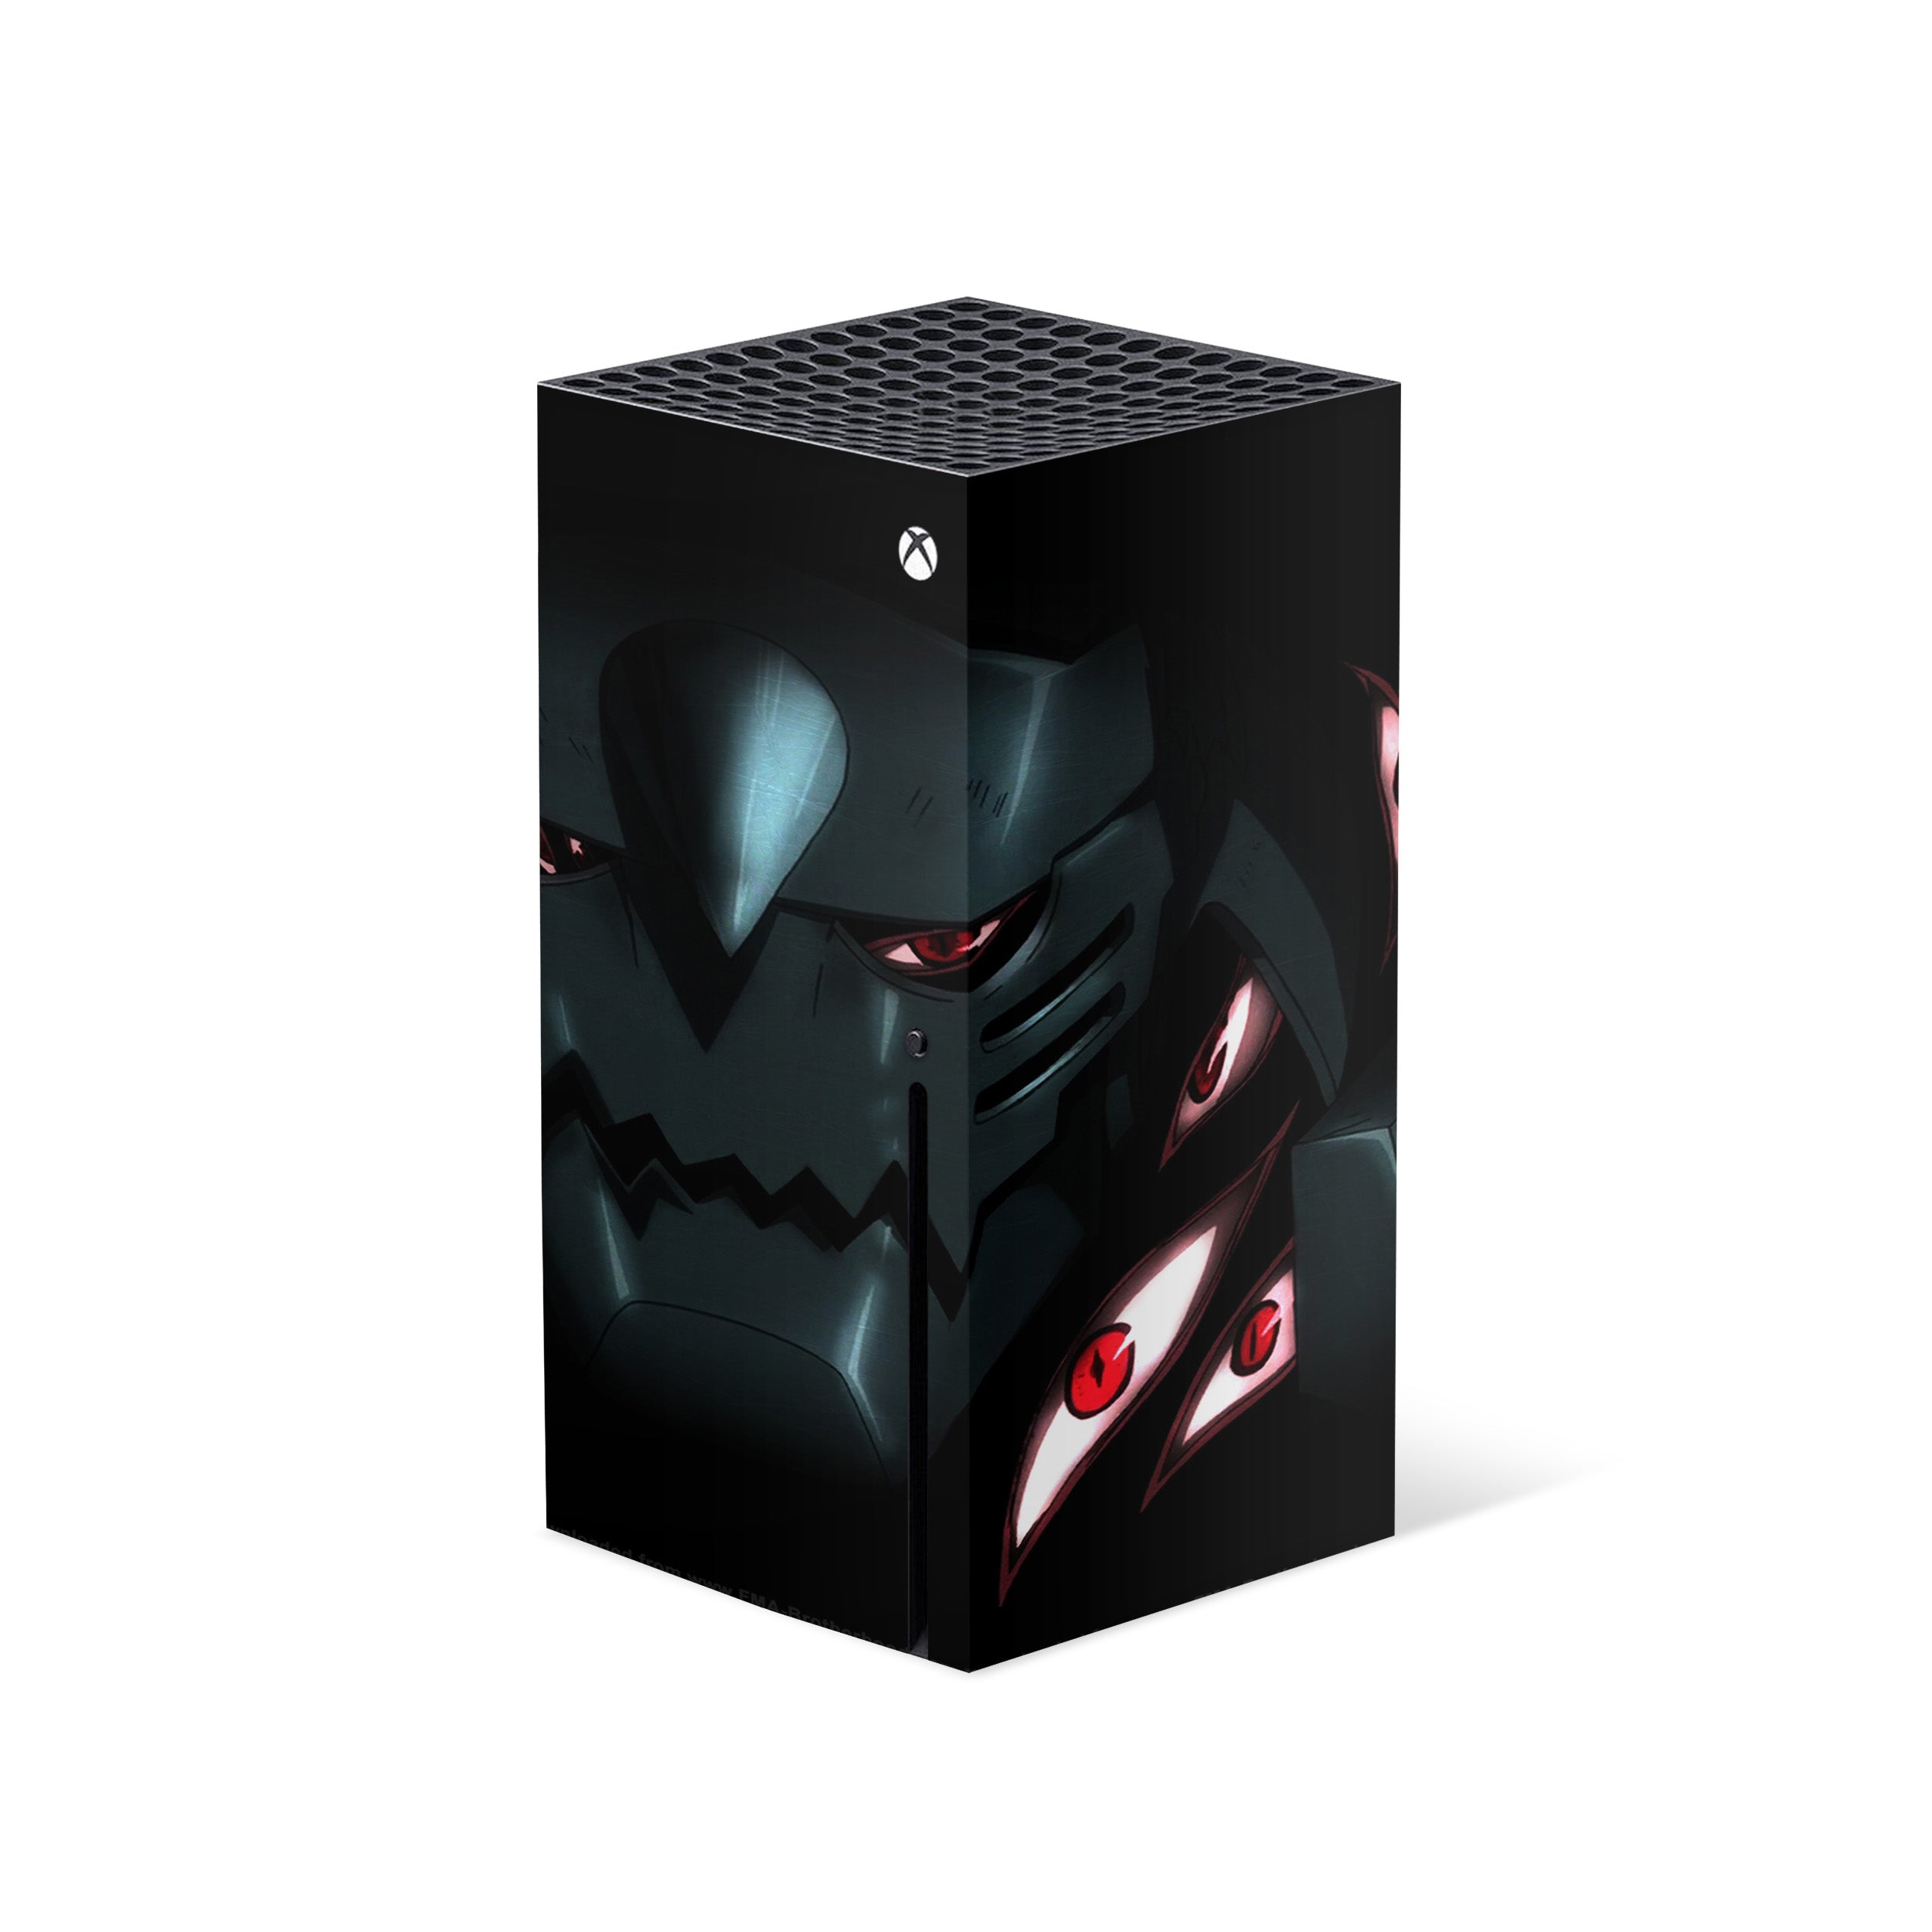 A video game skin featuring a Fullmetal Alchemist Alphonse Elric design for the Xbox Series X.